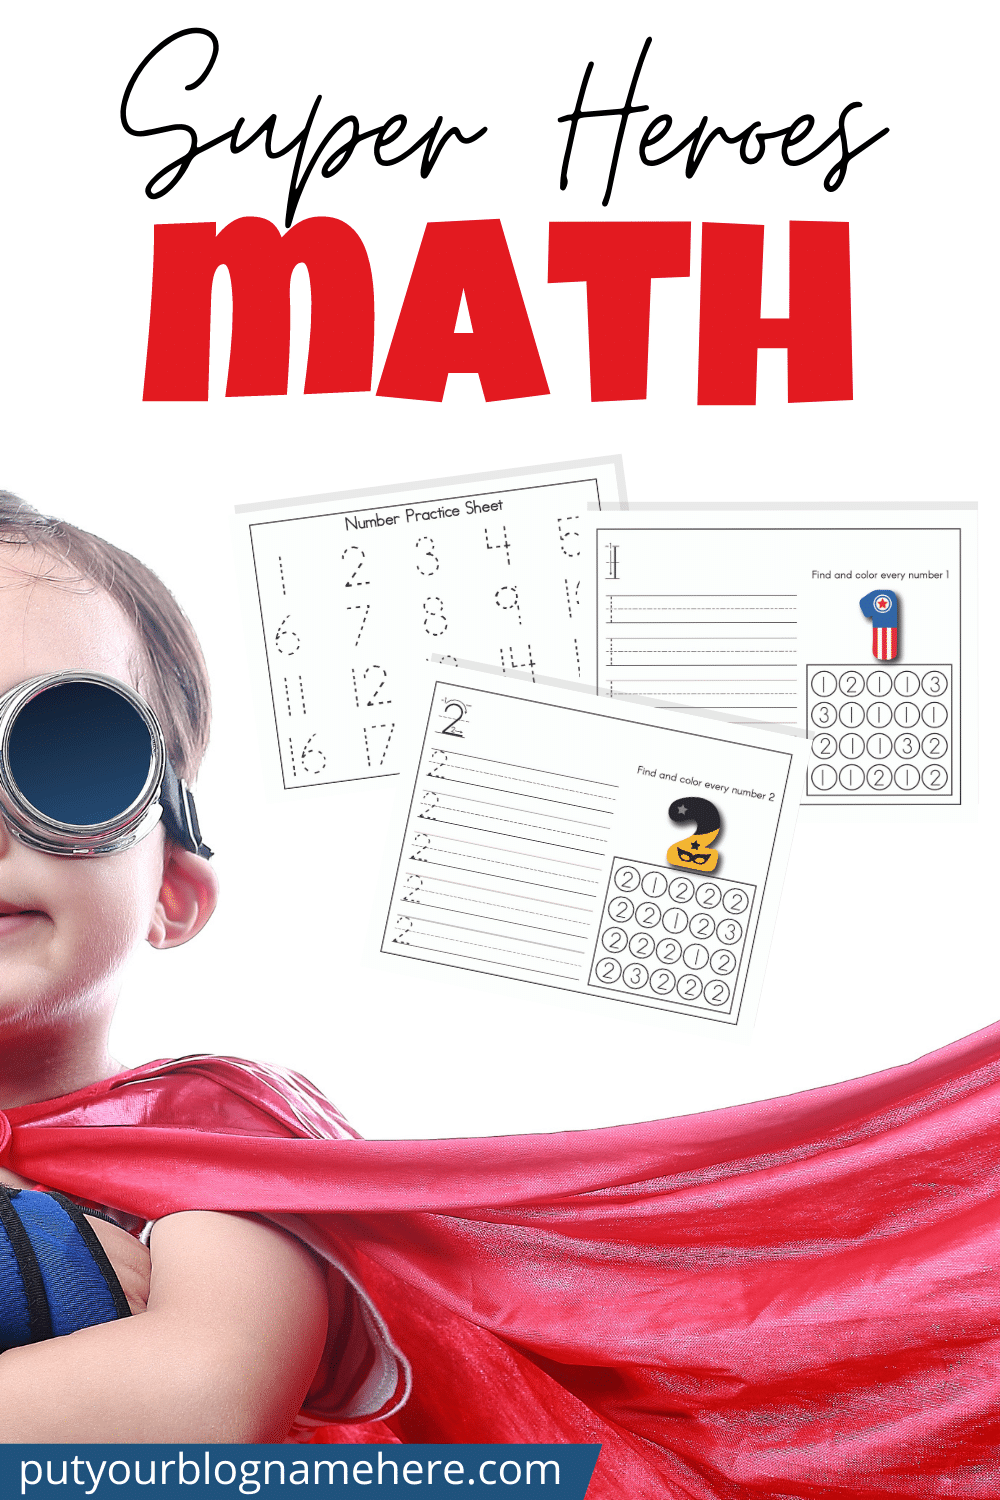 Use these 21 printable pages to help your little super heroes learn to identify and write the numbers 1-20! Laminate the pages to use them over and over. You'll also find additional ways to use these pages and to extend your number practice in fun ways.